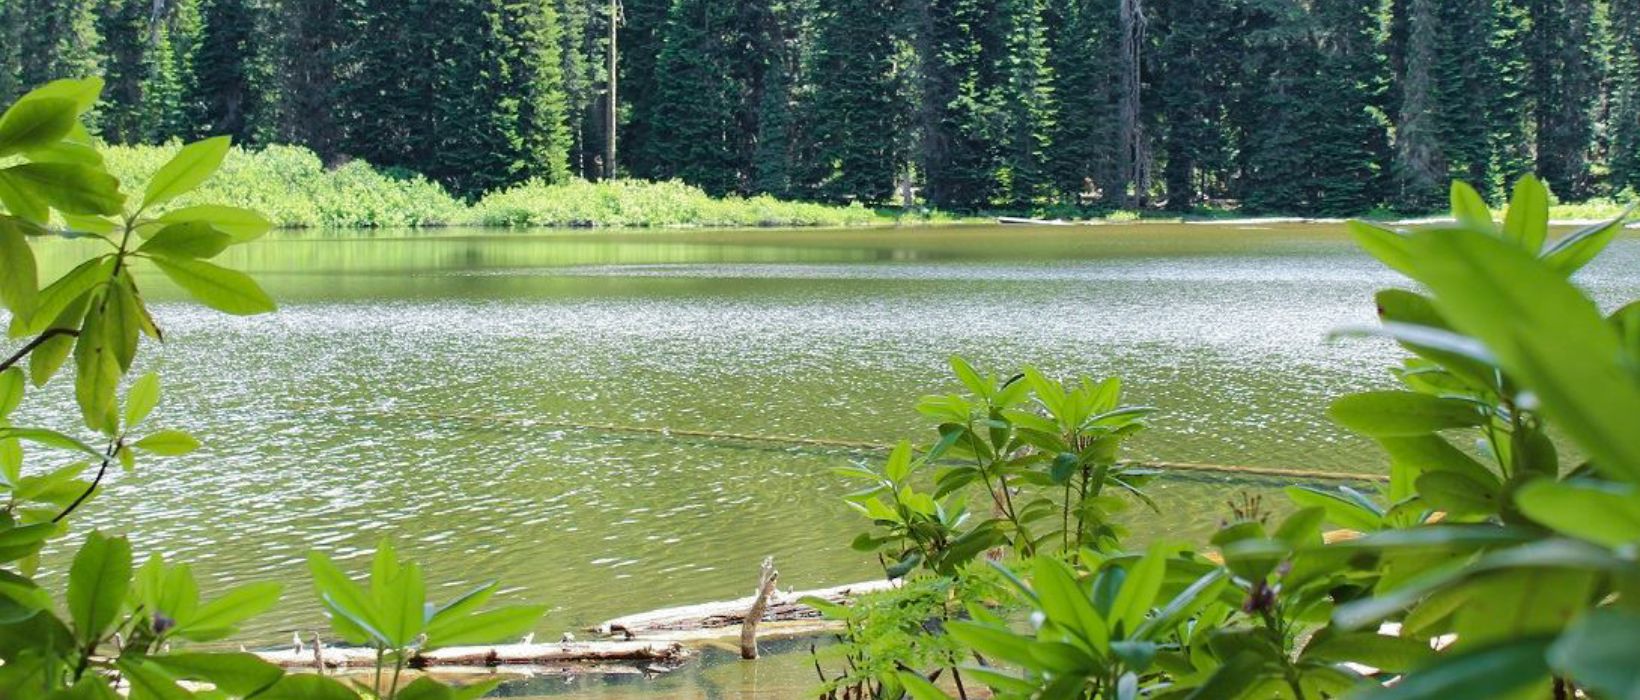 A calm, shallow lake with downed logs floating on the surface. Green leaves and trees surround it.